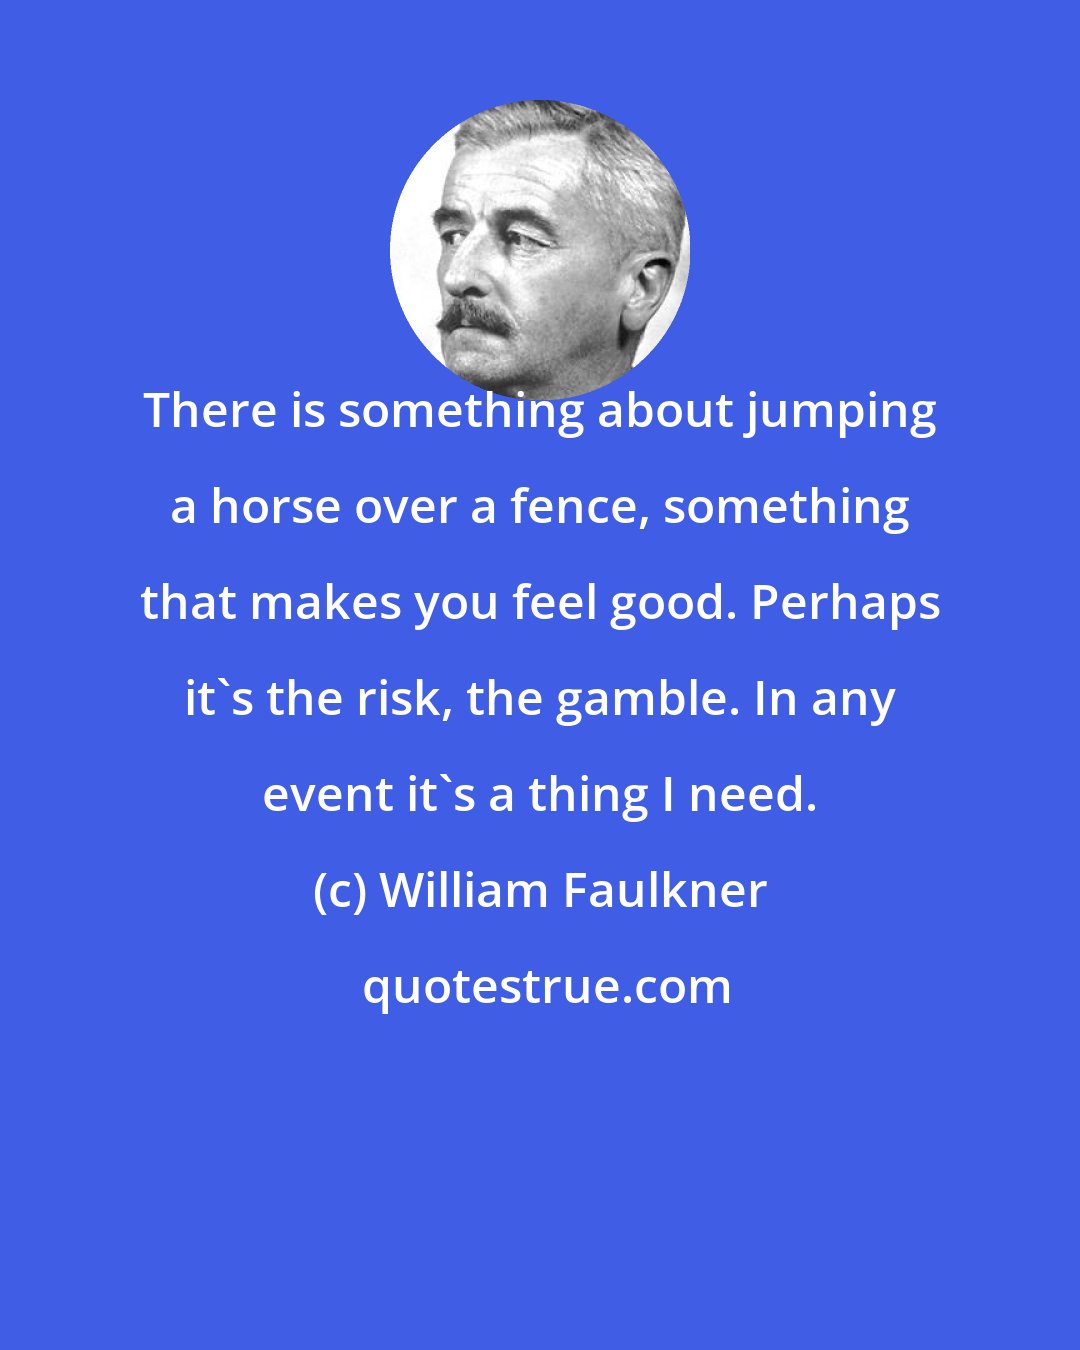 William Faulkner: There is something about jumping a horse over a fence, something that makes you feel good. Perhaps it's the risk, the gamble. In any event it's a thing I need.